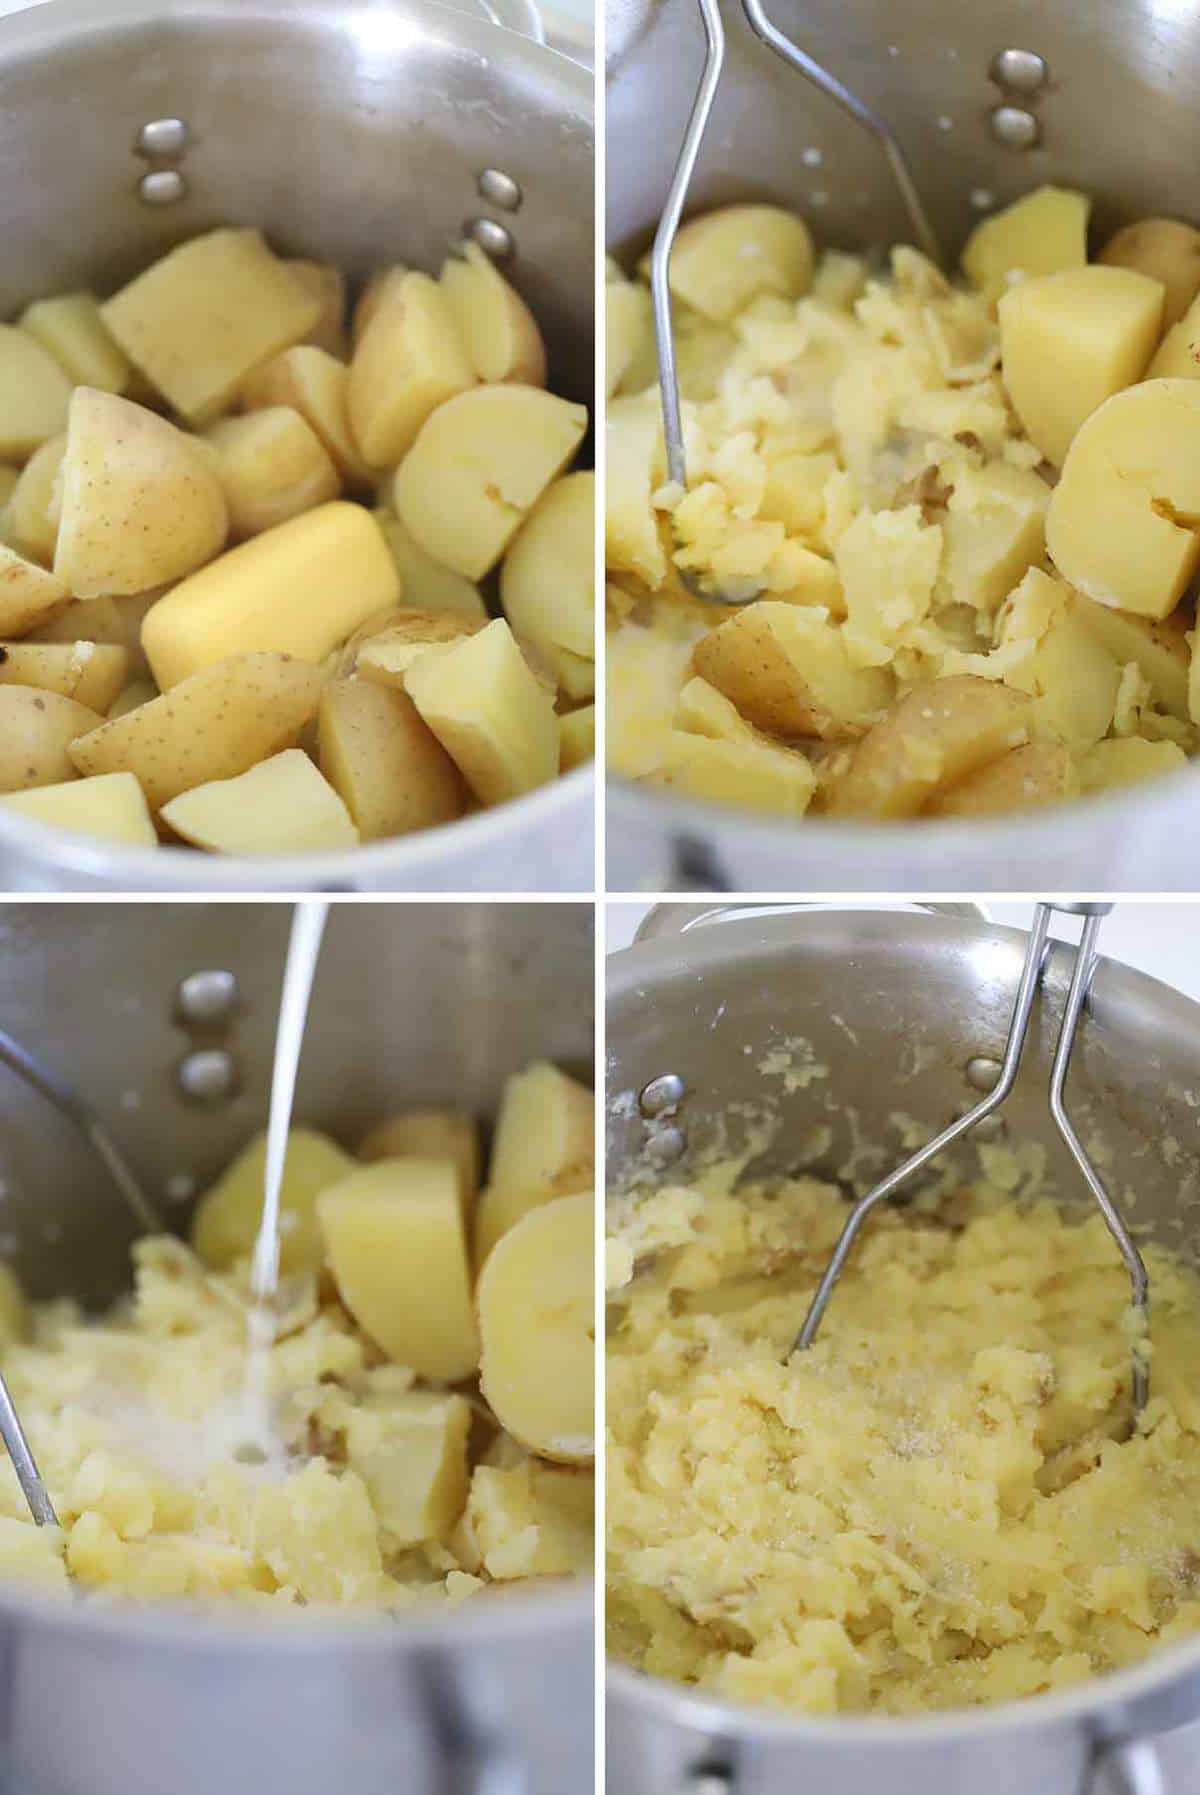 Making mashed potatoes in a pot with butter and milk.